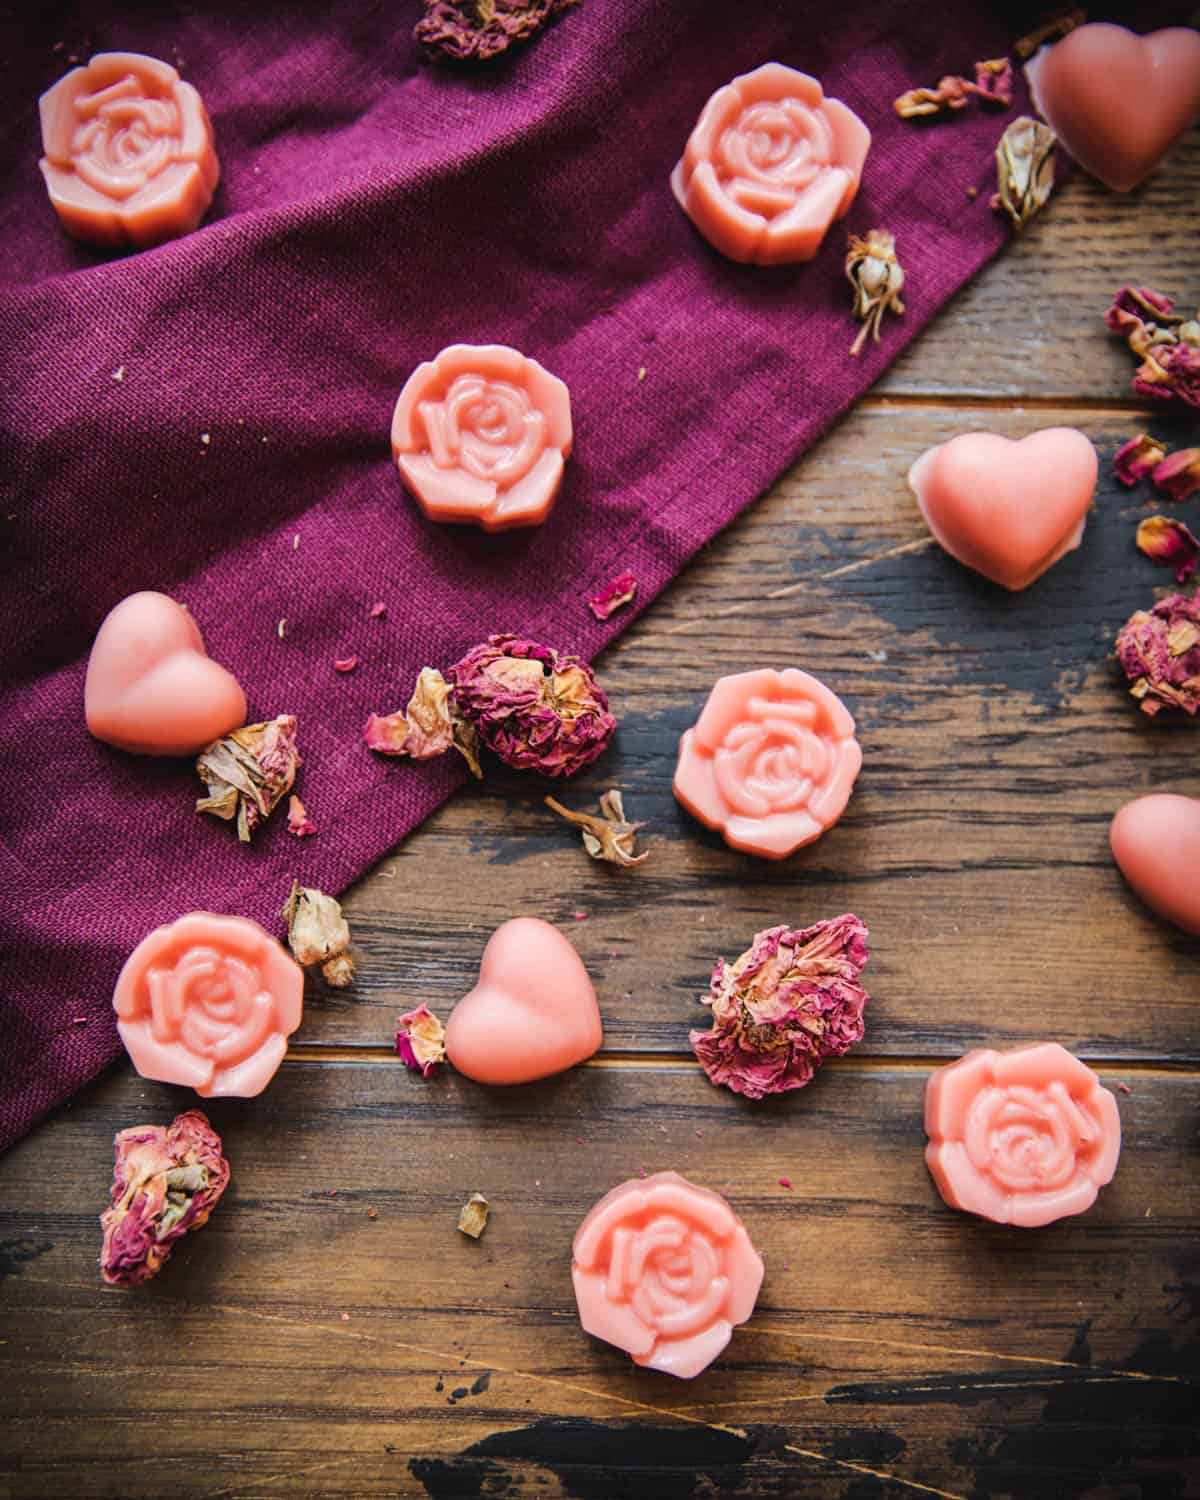 Rose and heart shaped pink lotion bars on a dark wood and burgundy cloth surface with scattered dried rose petals surrounding. 